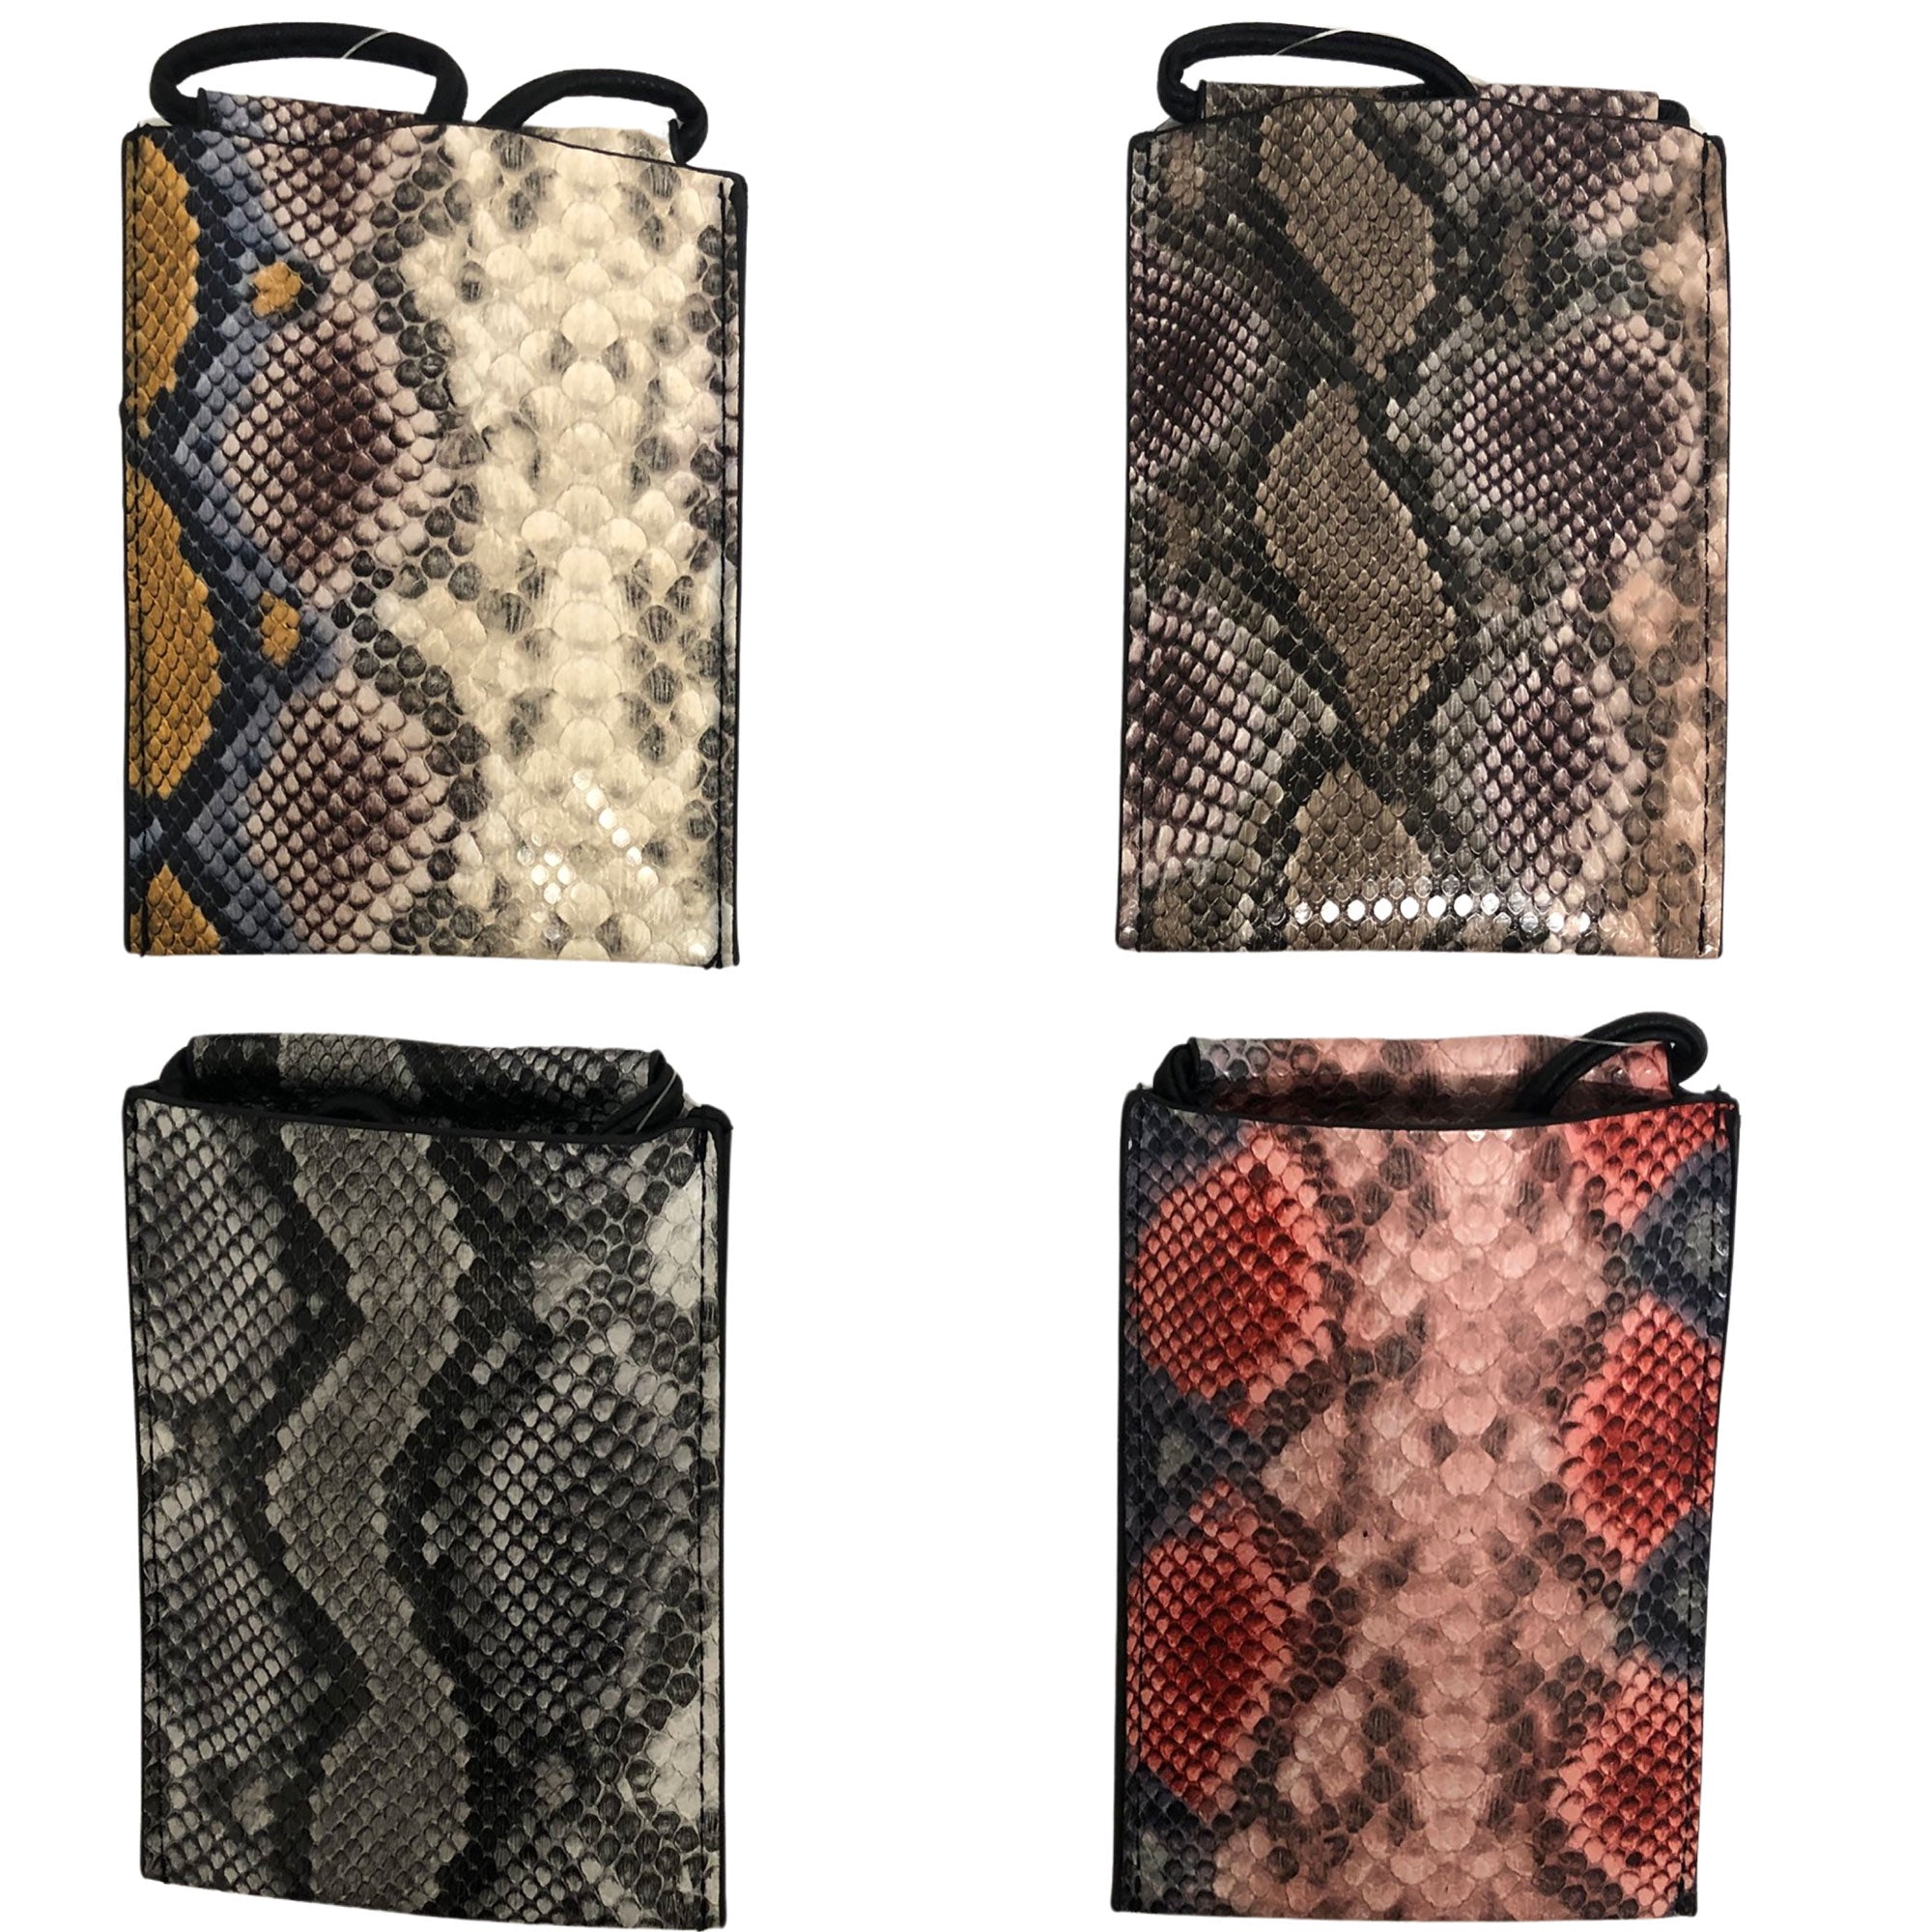 CLEARANCE CROSSBODY BAG POUCH SNAKE PRINT (CASE OF 48 - $1.75 / PIECE)  Wholesale Crossbody Bag in Assorted Colors SKU: M186-SNK-48